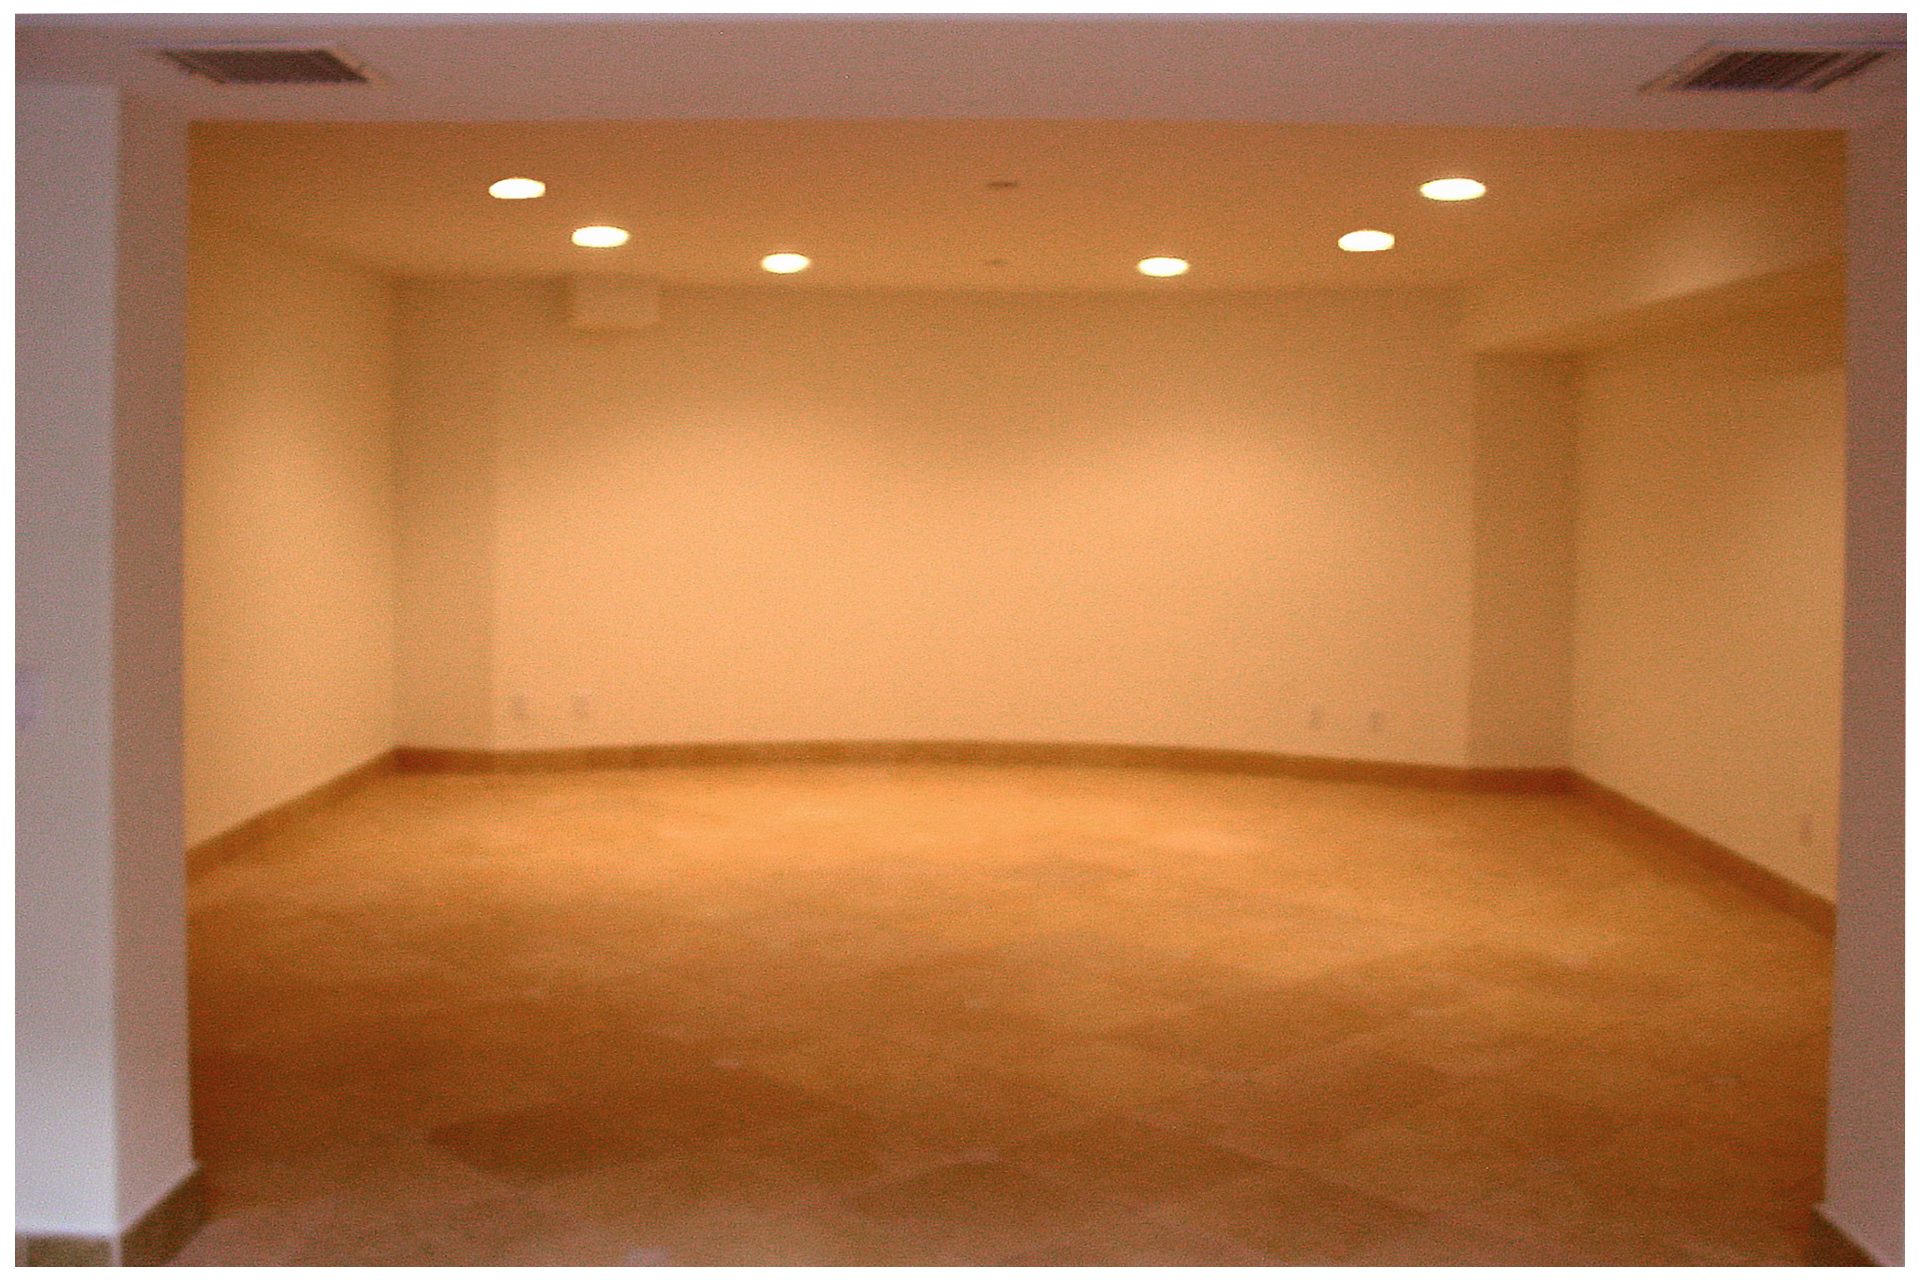 SMALL THEATER IN A DEDICATED ROOMConcrete walls & Ceiling were treated with sound aborbing materials prior to additoin of finished wall materials.